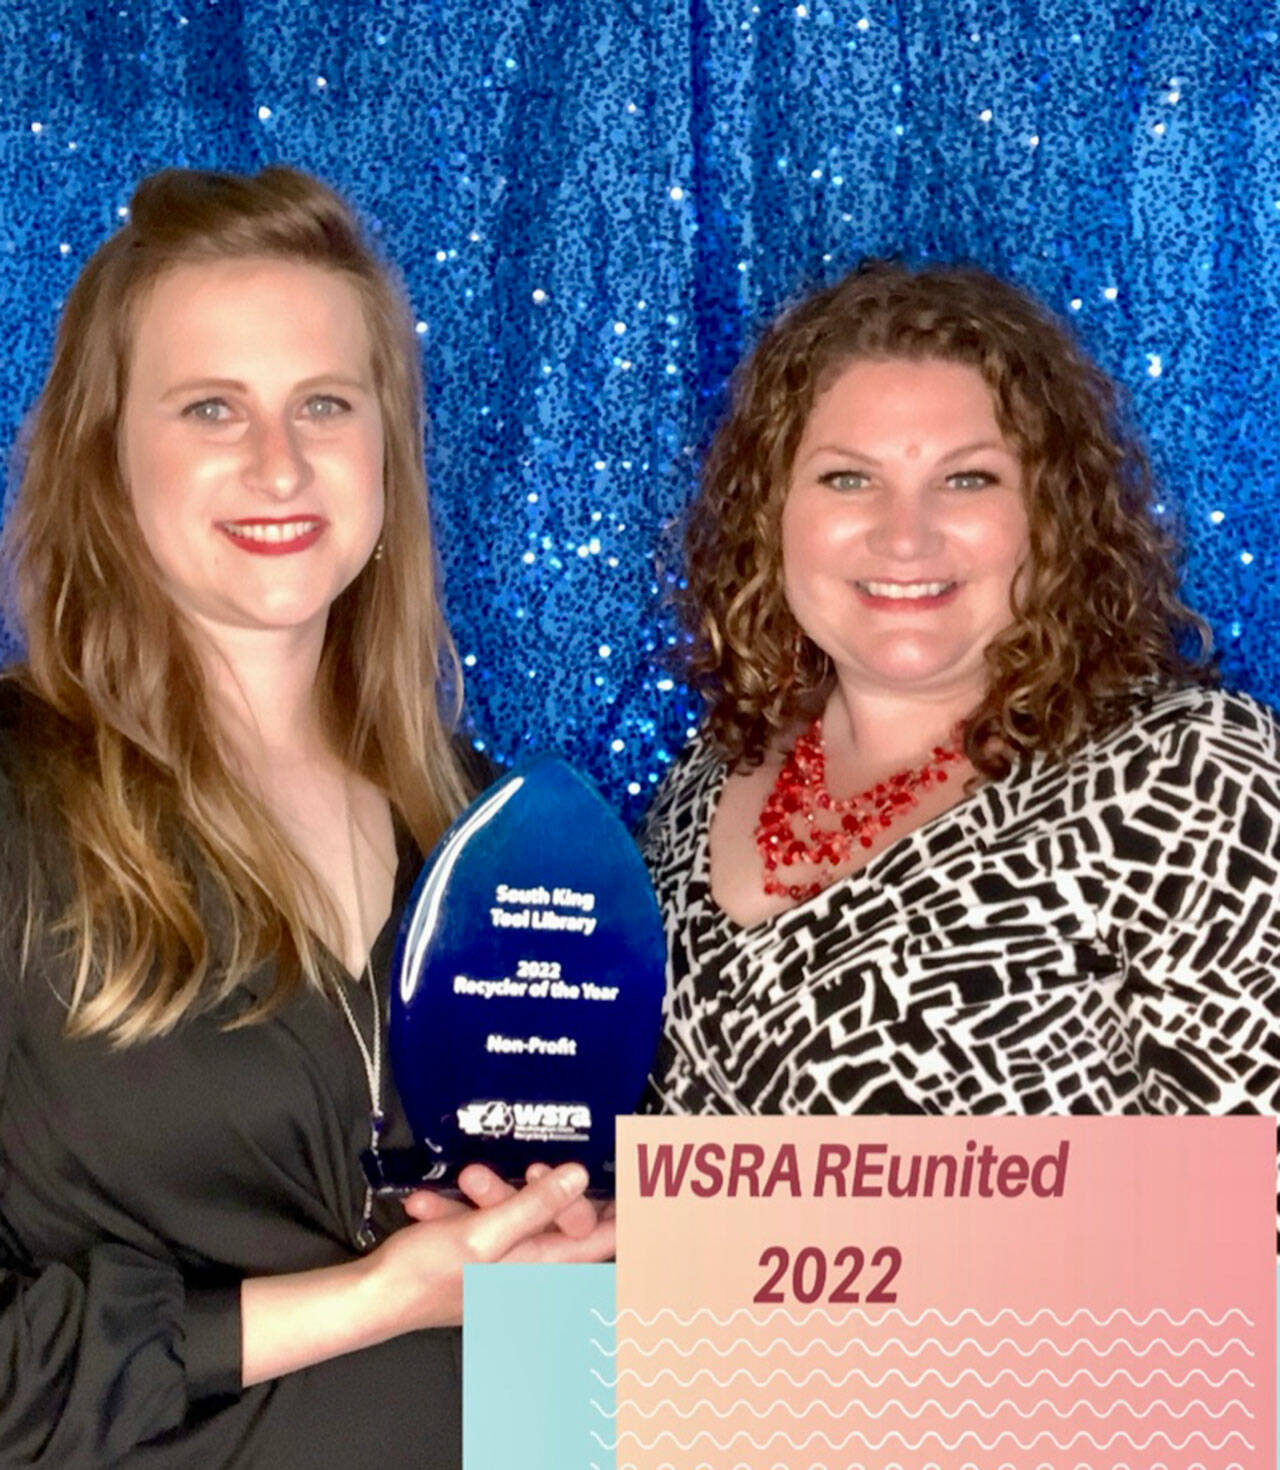 Courtesy photo
Executive Director Amanda Miller, left, and Founder Jeanette Jurgensen accepting their award from the Washington State Recycling Association on May 17.